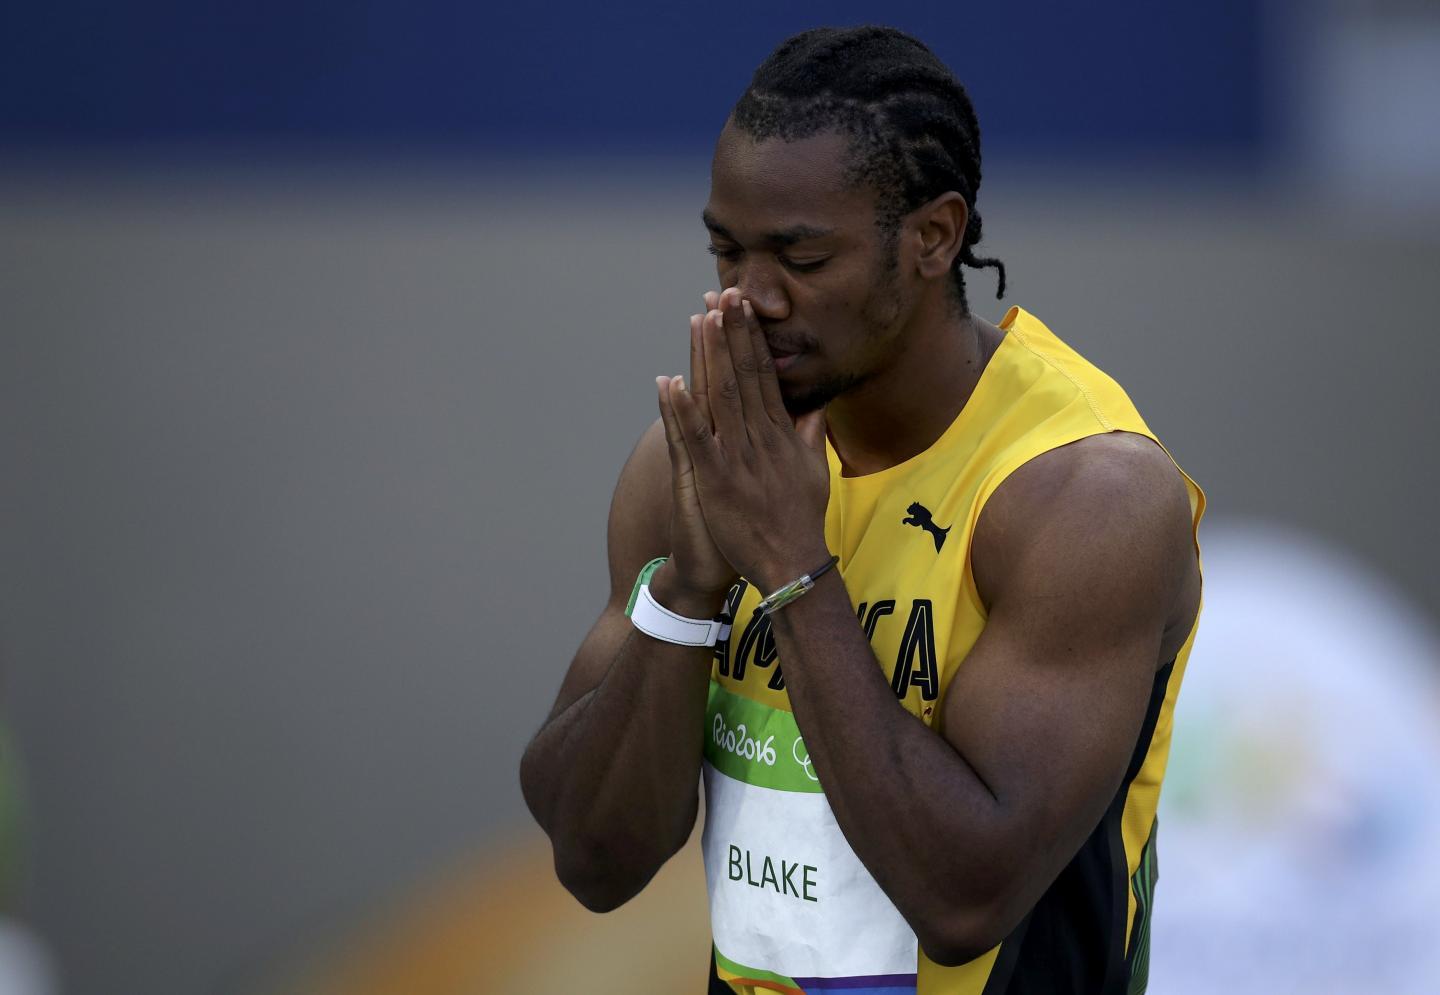 Rio 2016: Can Yohan Blake, The Second Fastest Man In The World, Win